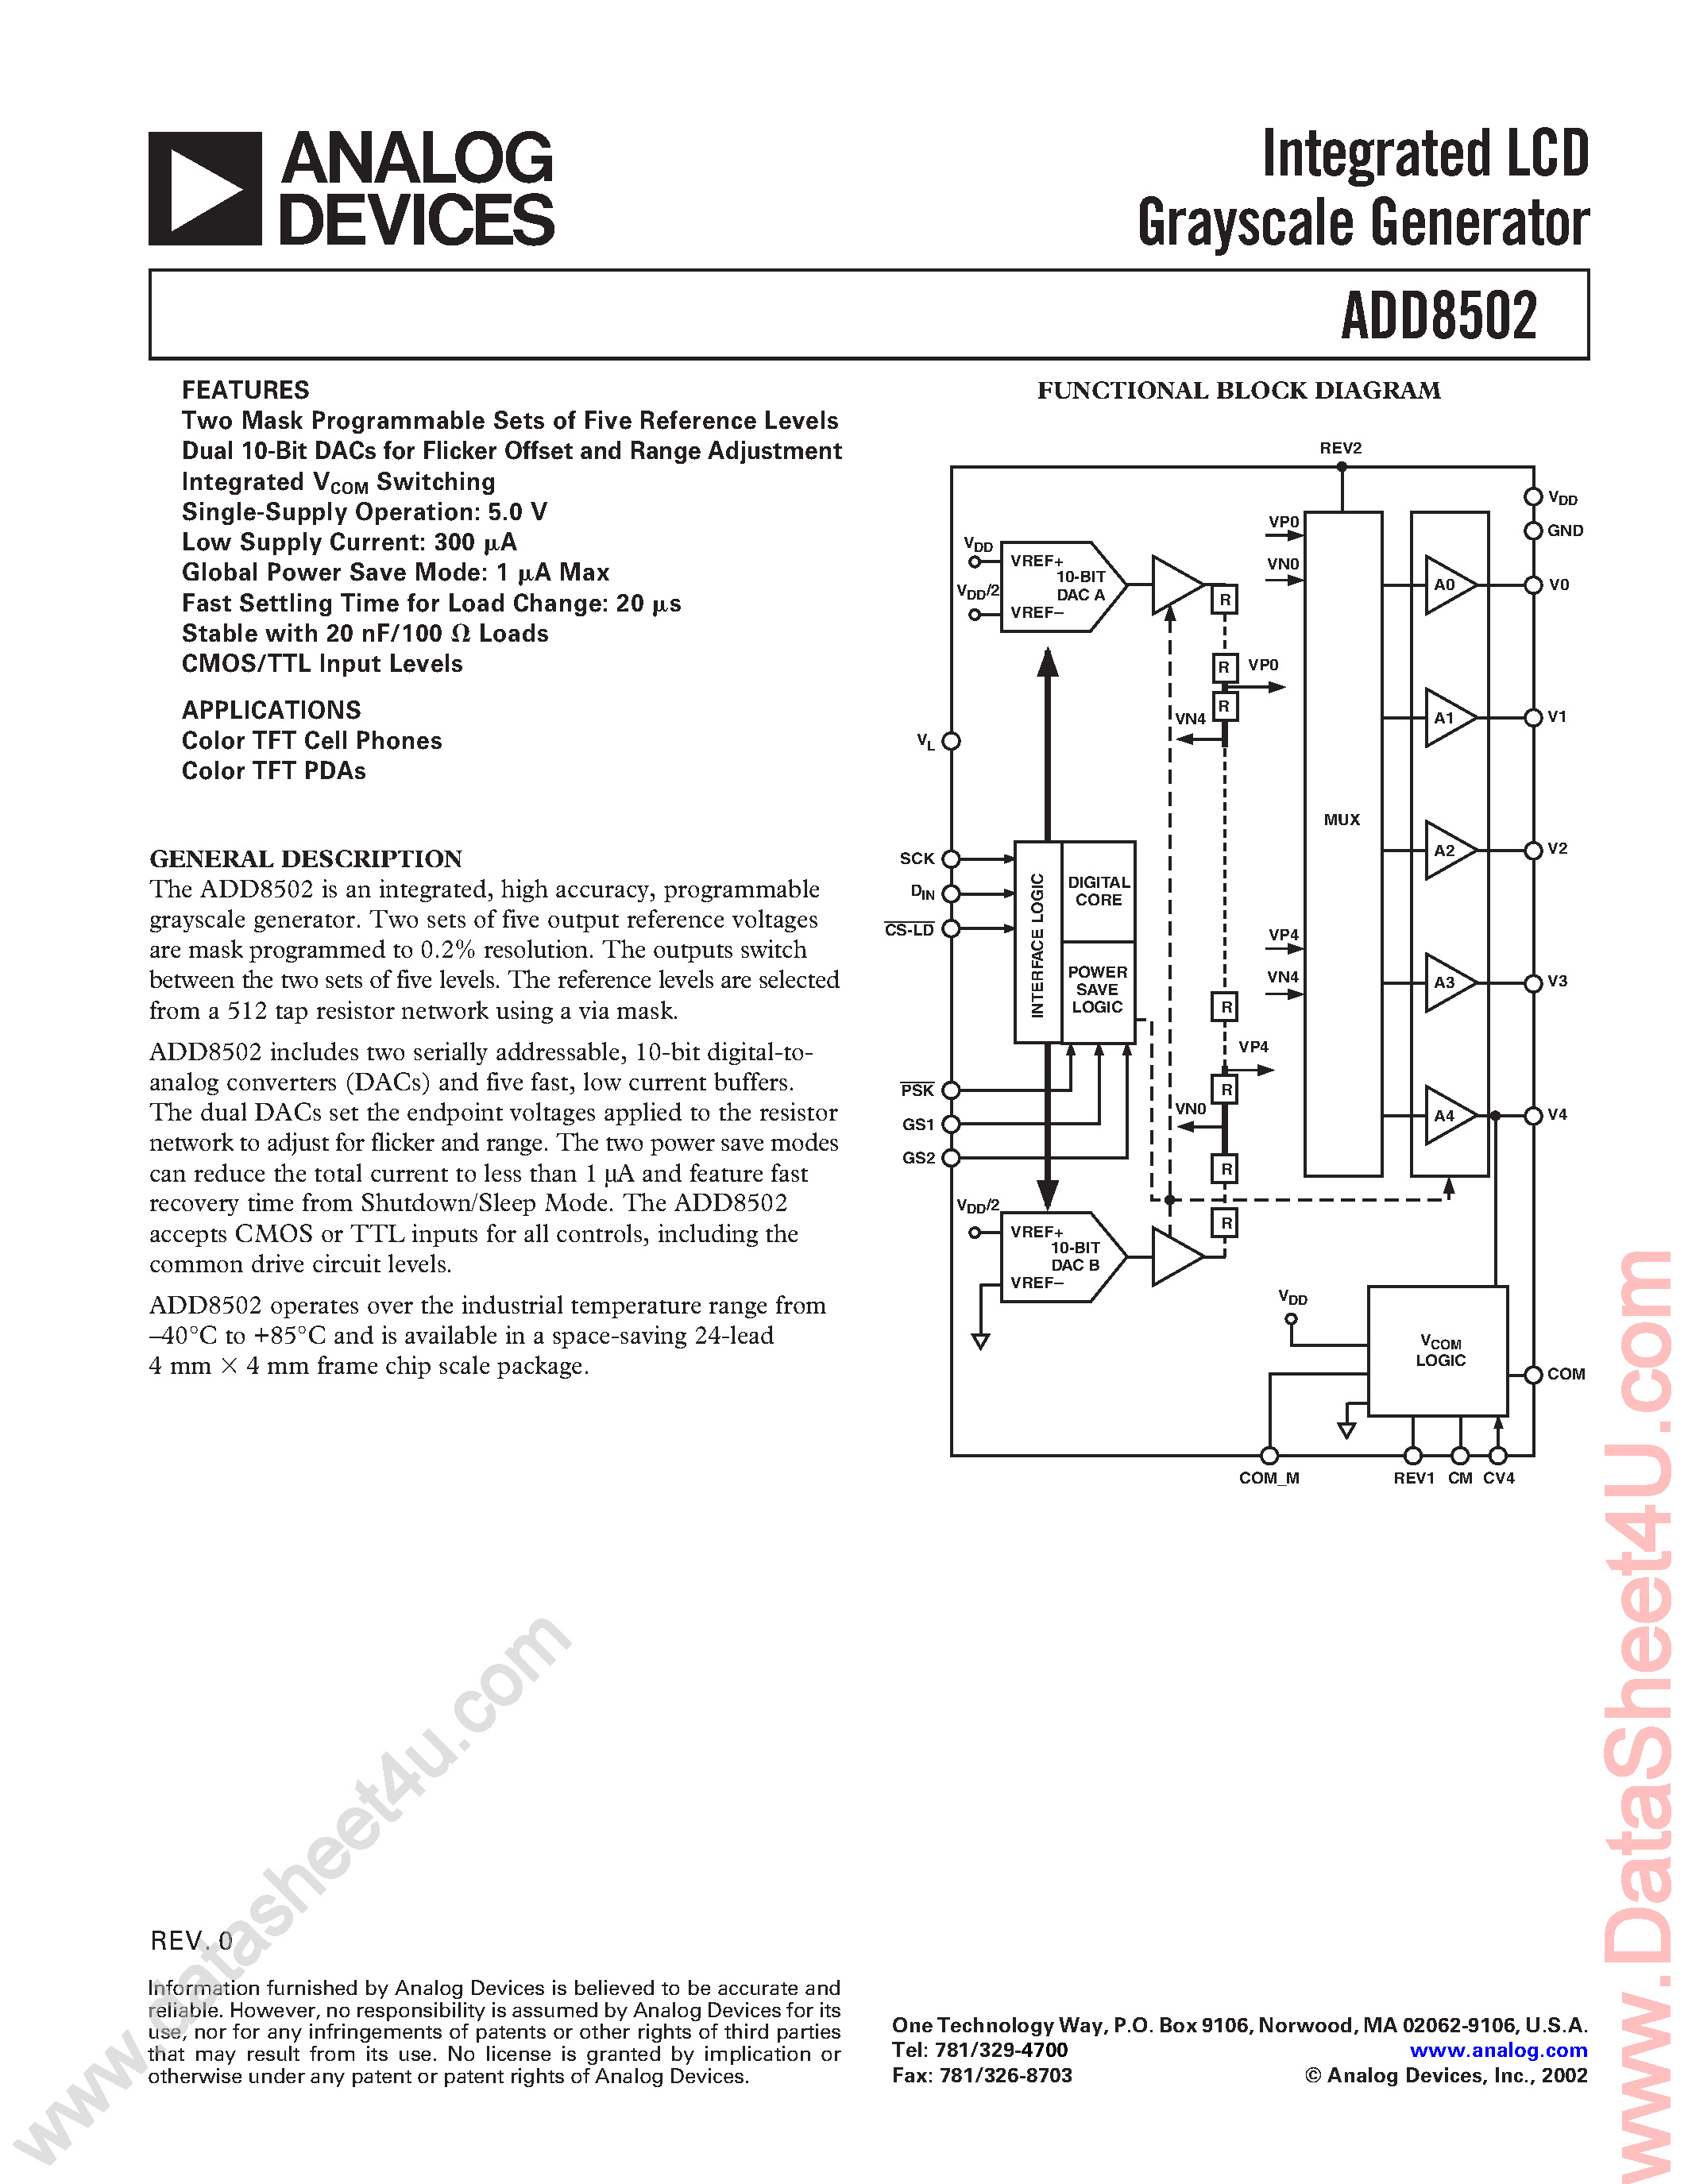 Datasheet ADD8502 - Integrated LCD Grayscale Generator page 1